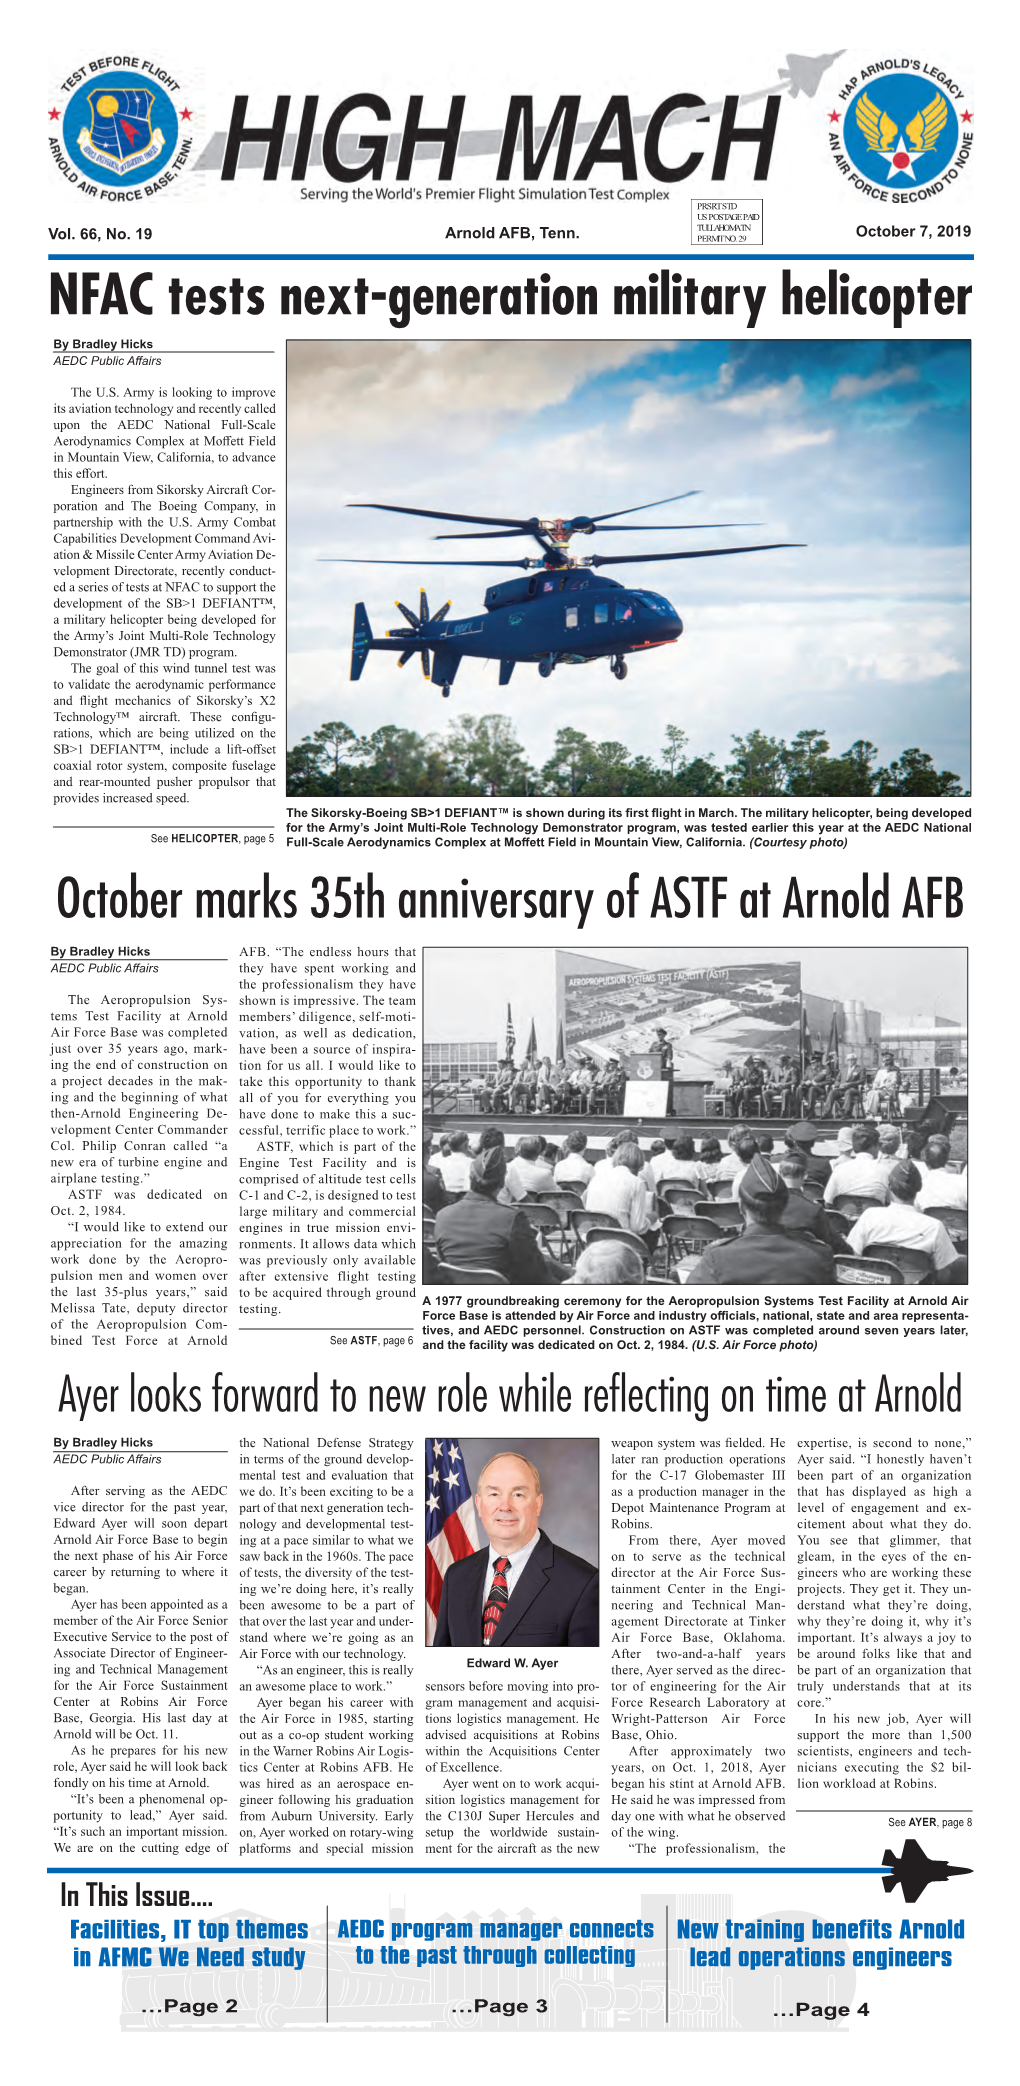 NFAC Tests Next-Generation Military Helicopter by Bradley Hicks AEDC Public Affairs